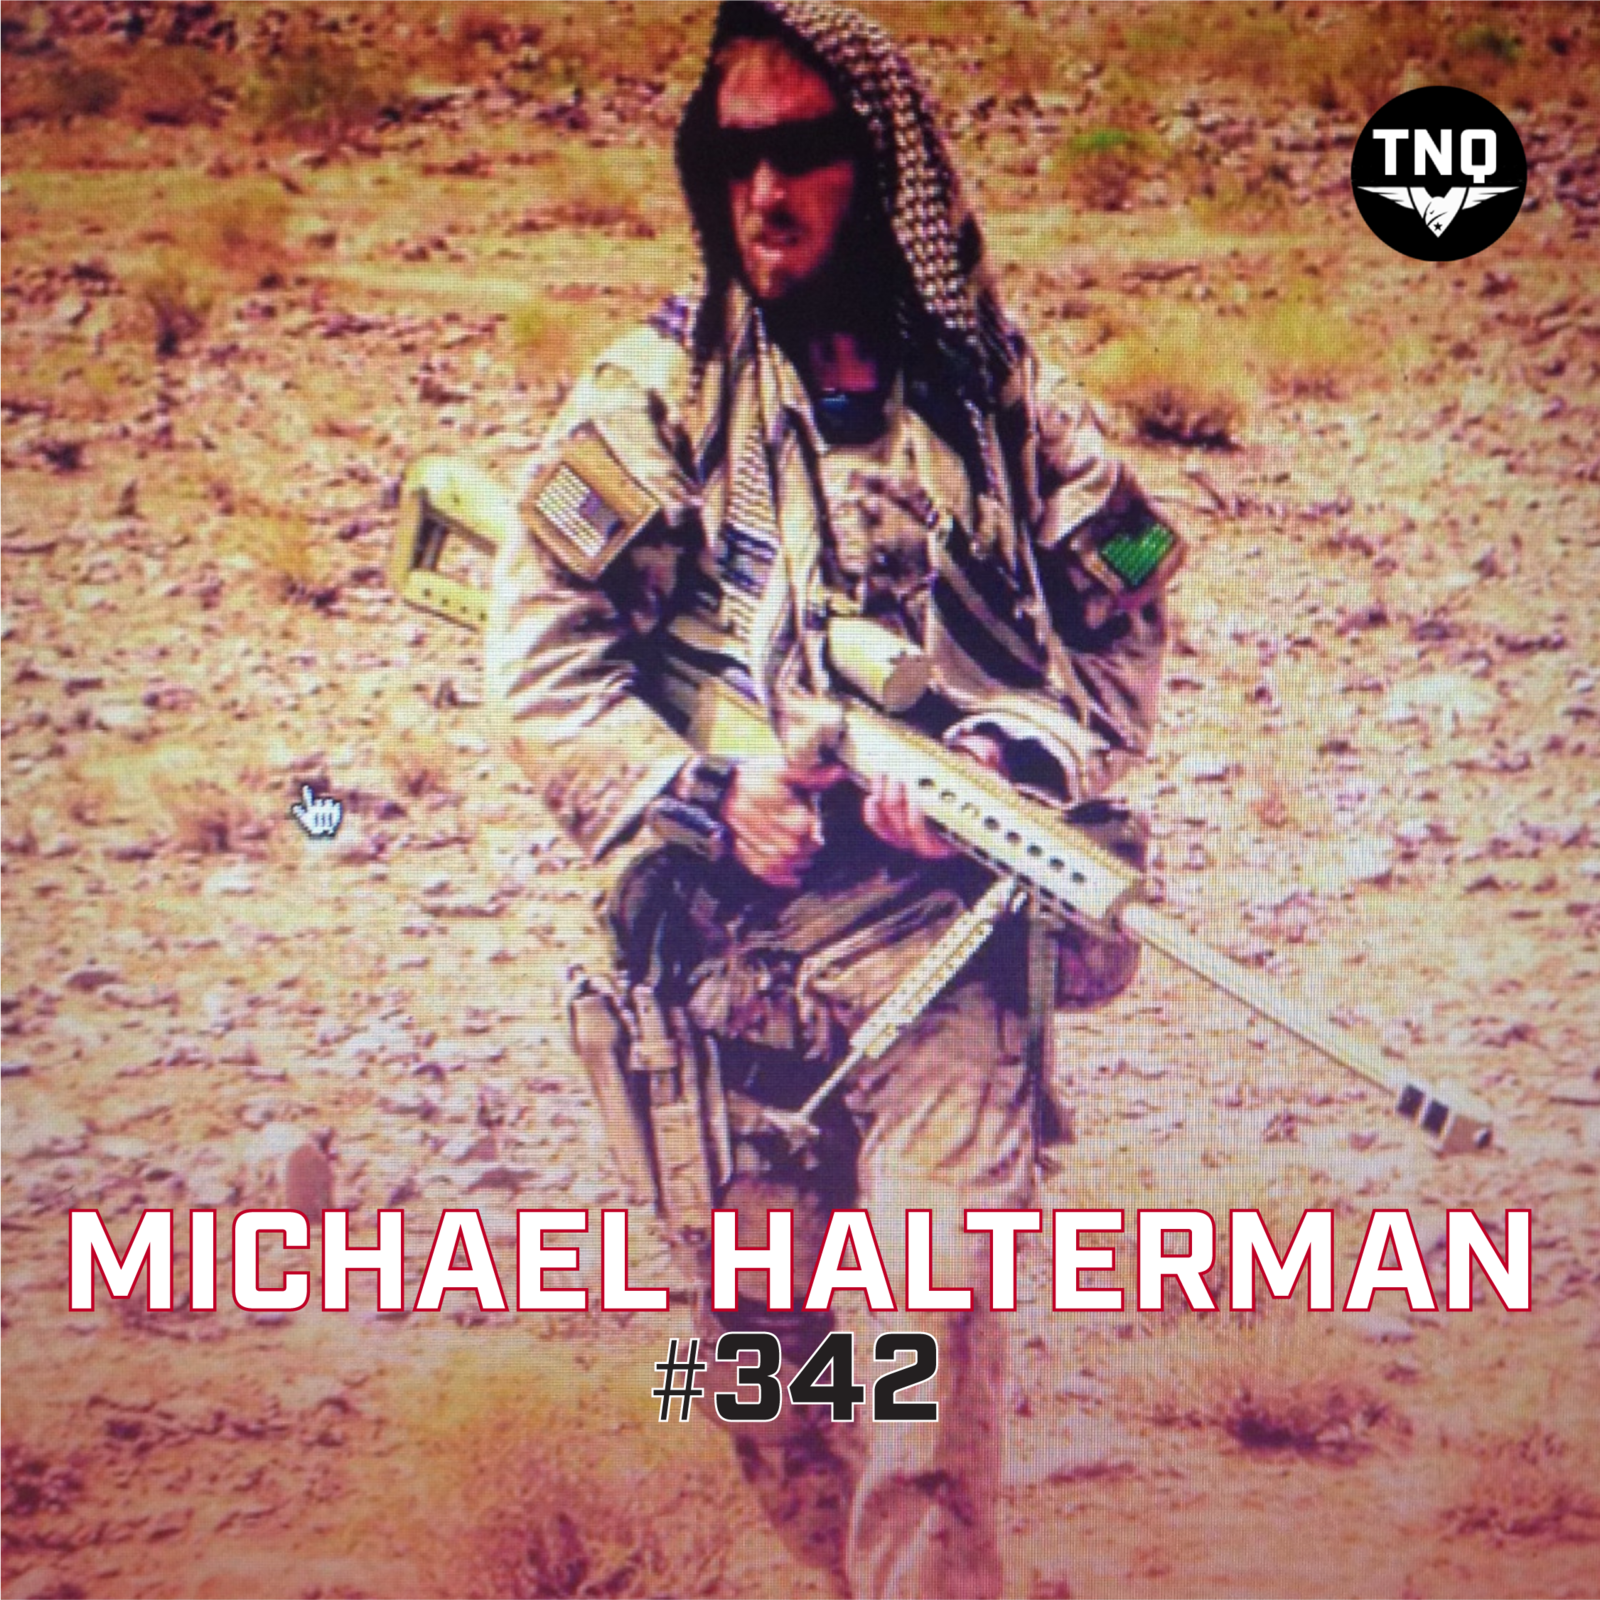 Michael Halterman: 1st Marine Raider Battalion & VP of "The Honor Foundation" Recounts His Time In The Military & Success After Service